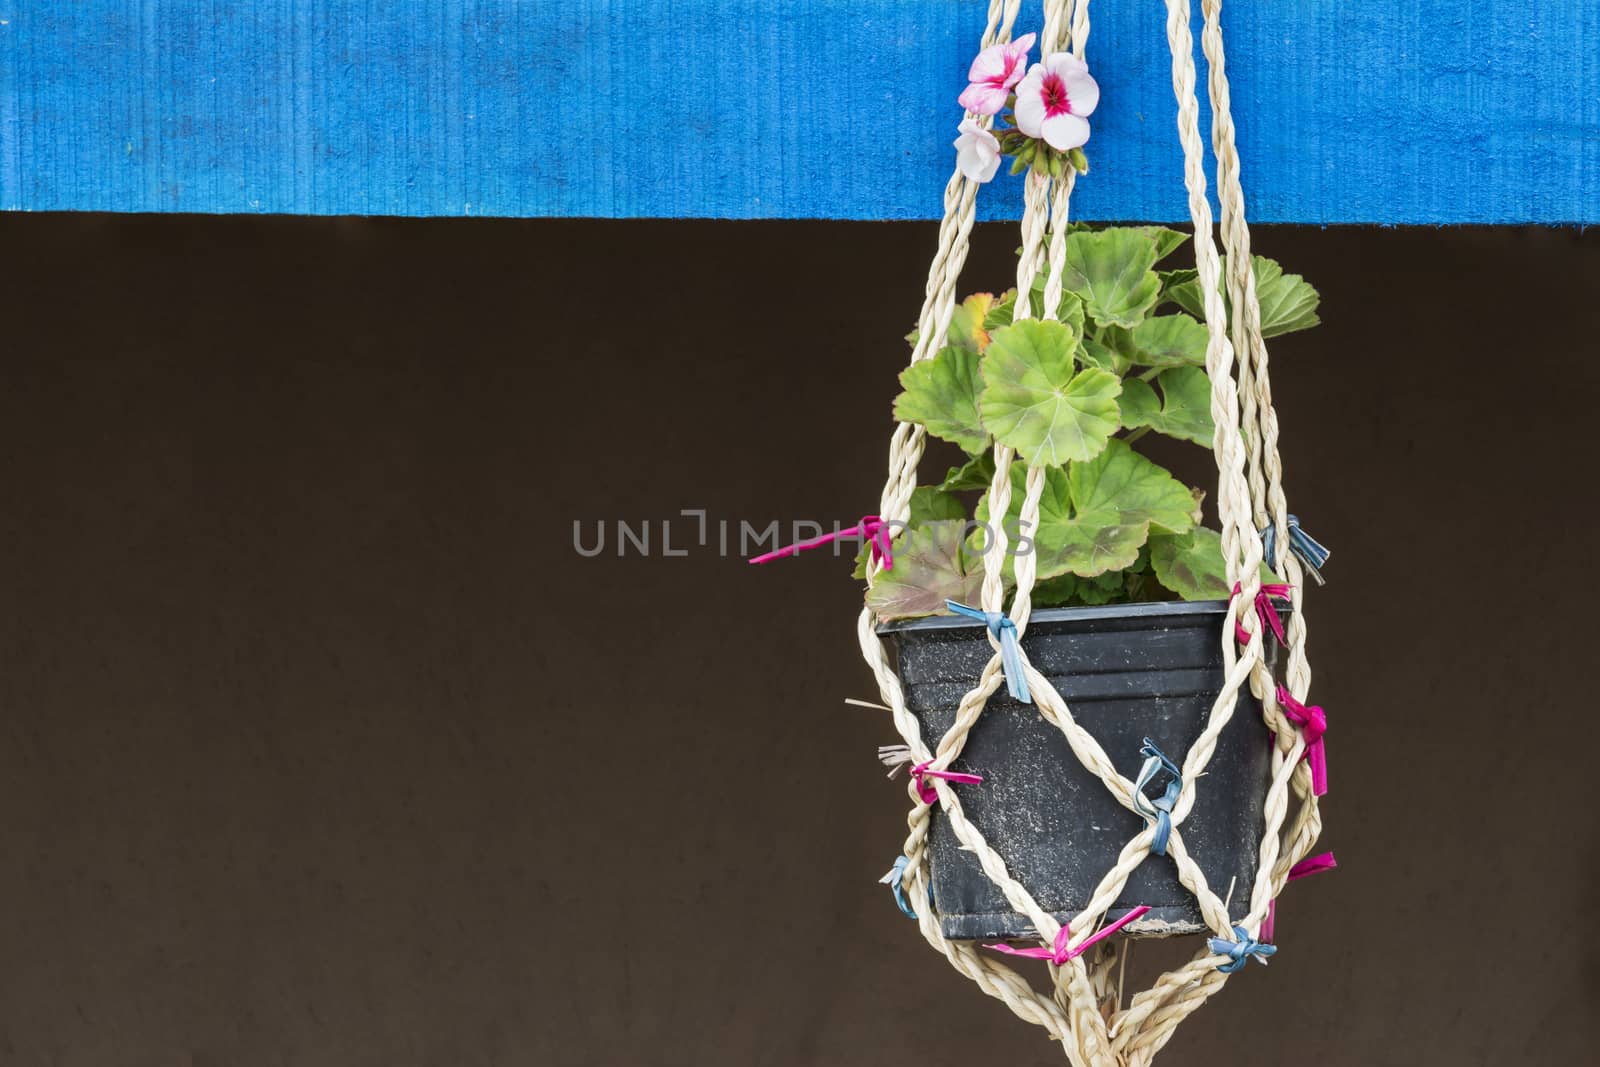 Close up view of  flower vase hanged on brown wall.